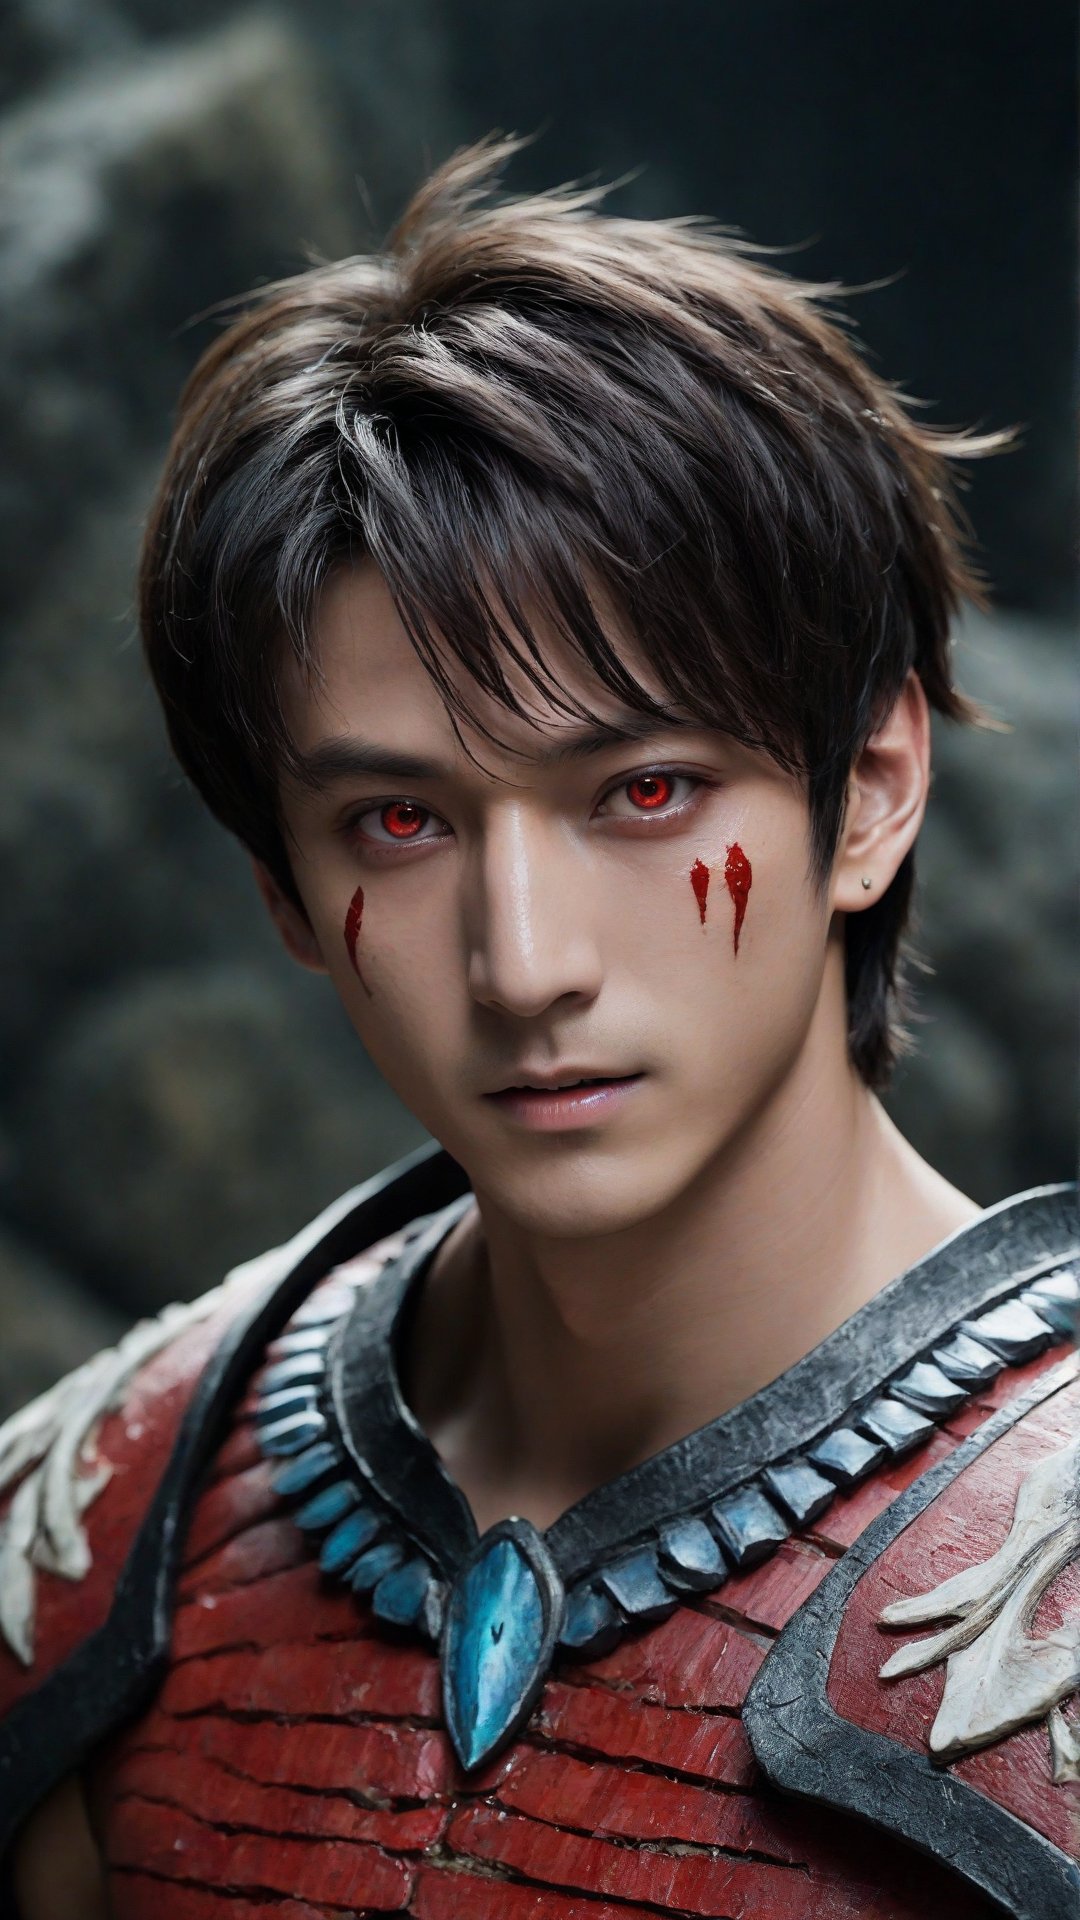 twenty year old male na'vi, (jungkook:1.2), ((ash gray skin)), white skin, gray palette, ((black hair)), ((short hair)), messy hair, ((bloody red eyes:1.3)), skin full of ((scales)), stern face, ((pointy fangs)), full of red painted stripes, wearing (bones) as acessories, wearing tribal clothing, wearing rope as clothing, beautiful na'vi, action scene, close-up face view, ((profile view)), realistic_eyes, hyper_realistic, extreme details, HDR, 4k quality, perfect quality, perfect image, HD quality, movie scene, Read description, ADD MORE DETAIL, vulcanic land background, cave with bonfires background